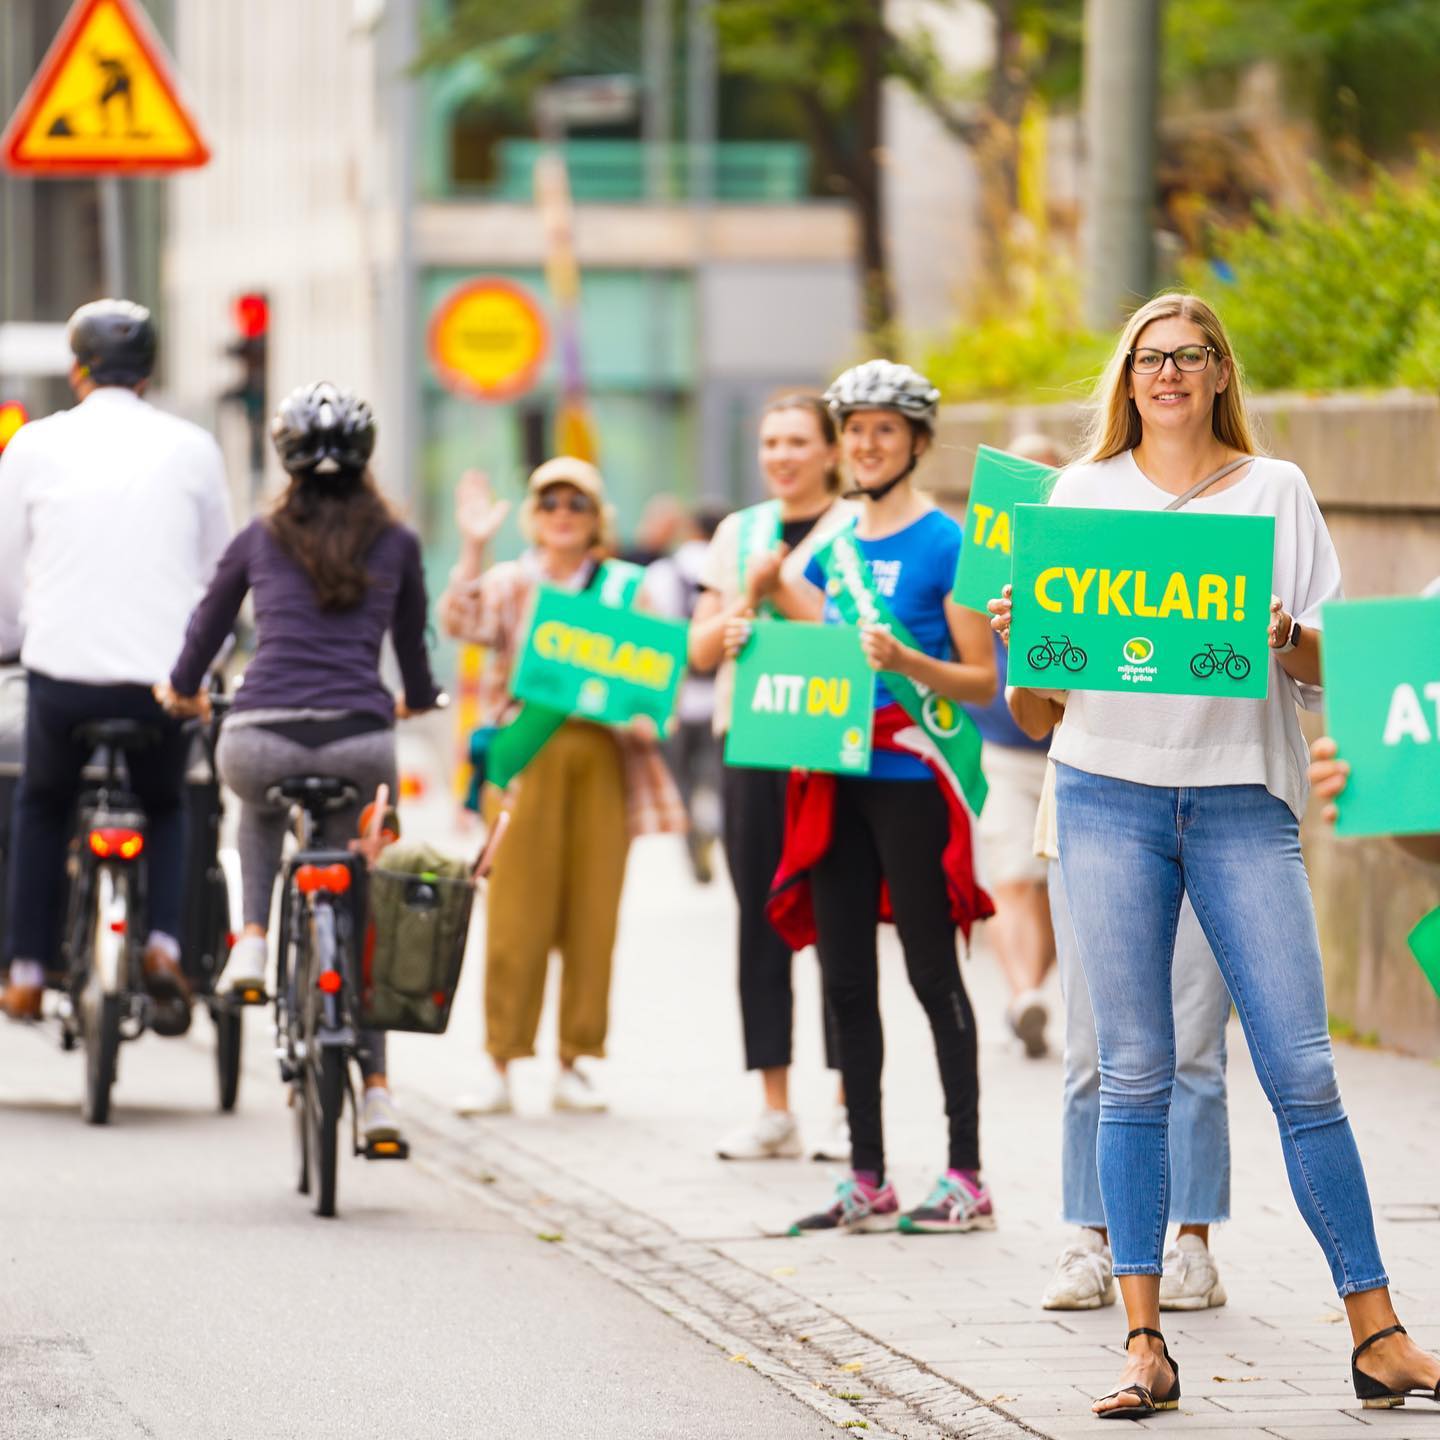 Cheering on bike riders - I'm in the middle with the helmet! Photo by Miljöpartiet's communication person